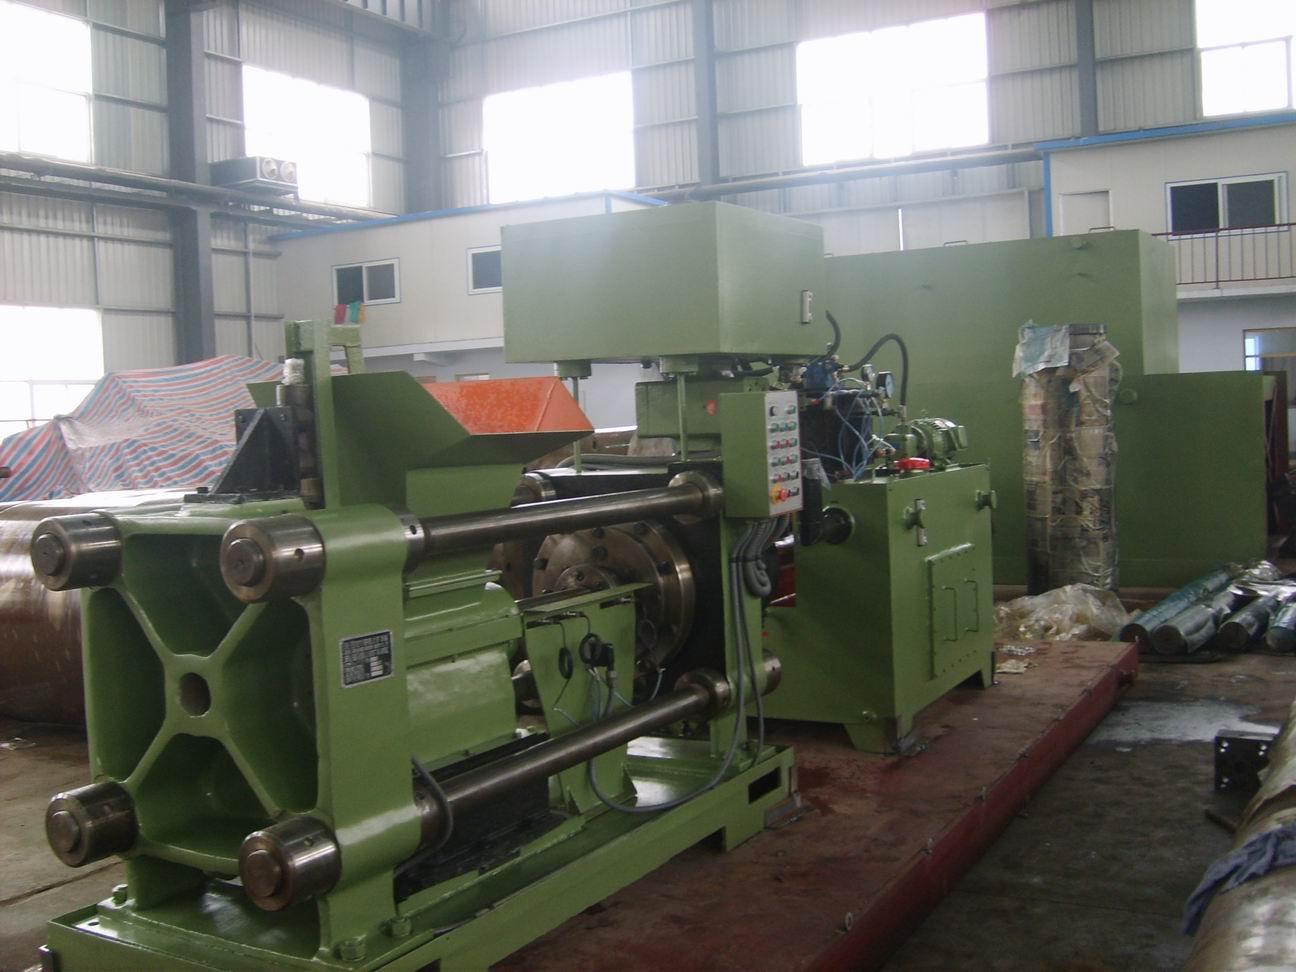 Y83-160 briquetting press ready ship to India